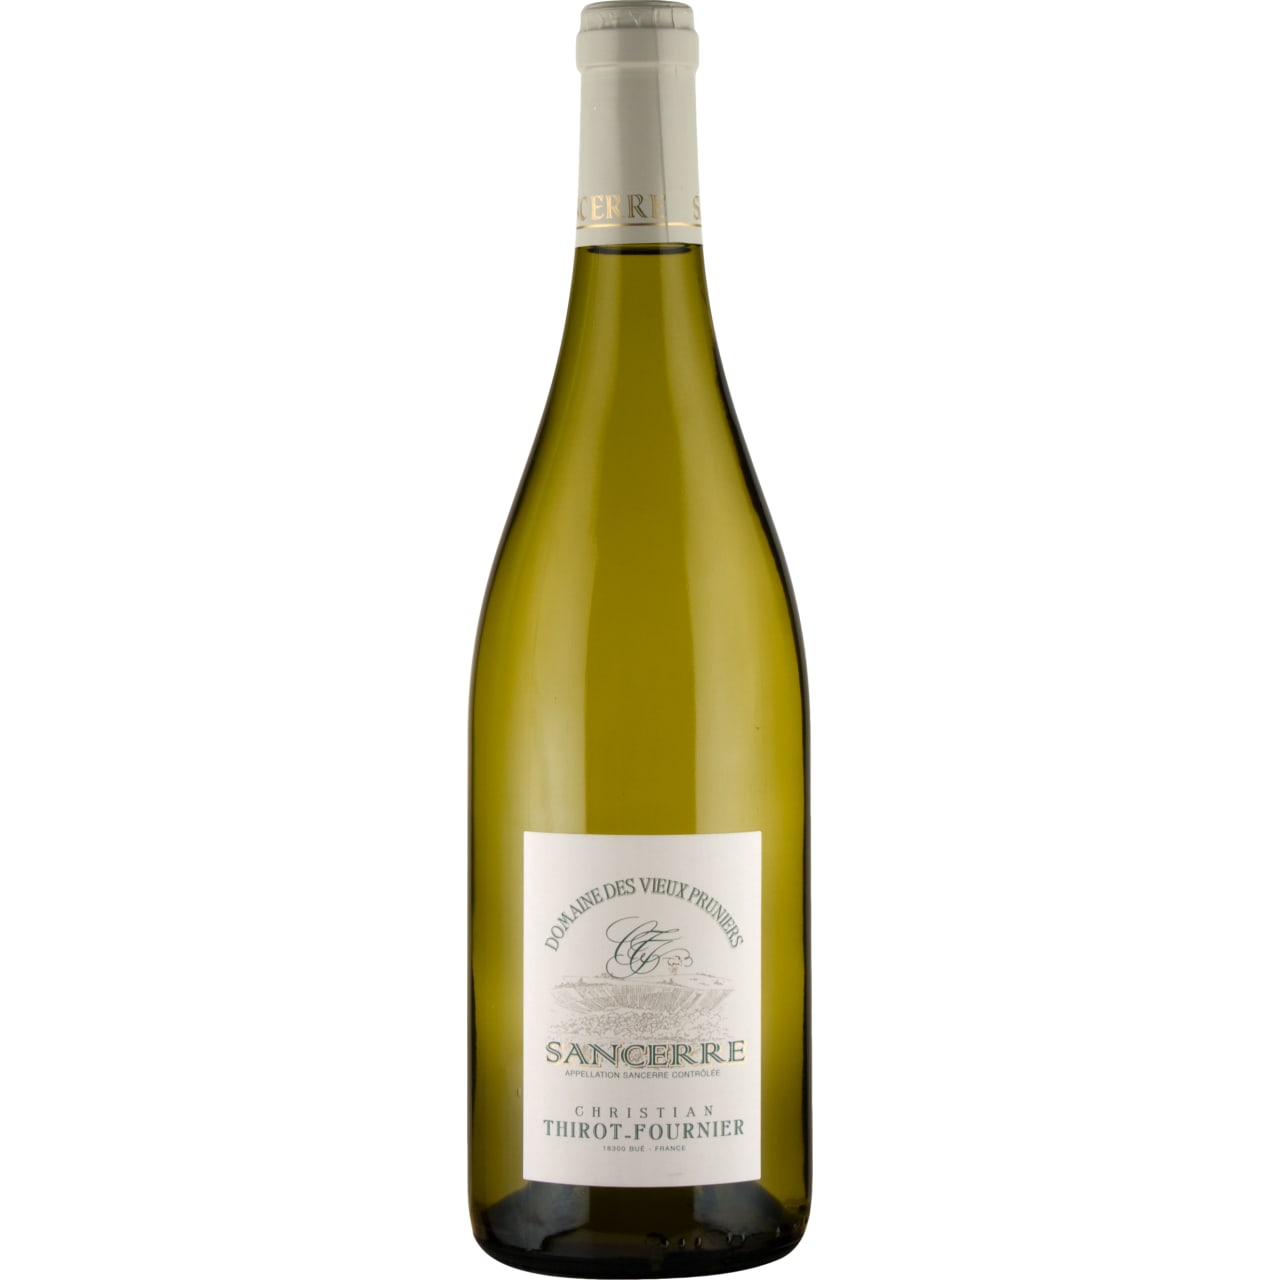 Delicate mineral notes of chalk and slate with plenty of melon and citrus fruits.